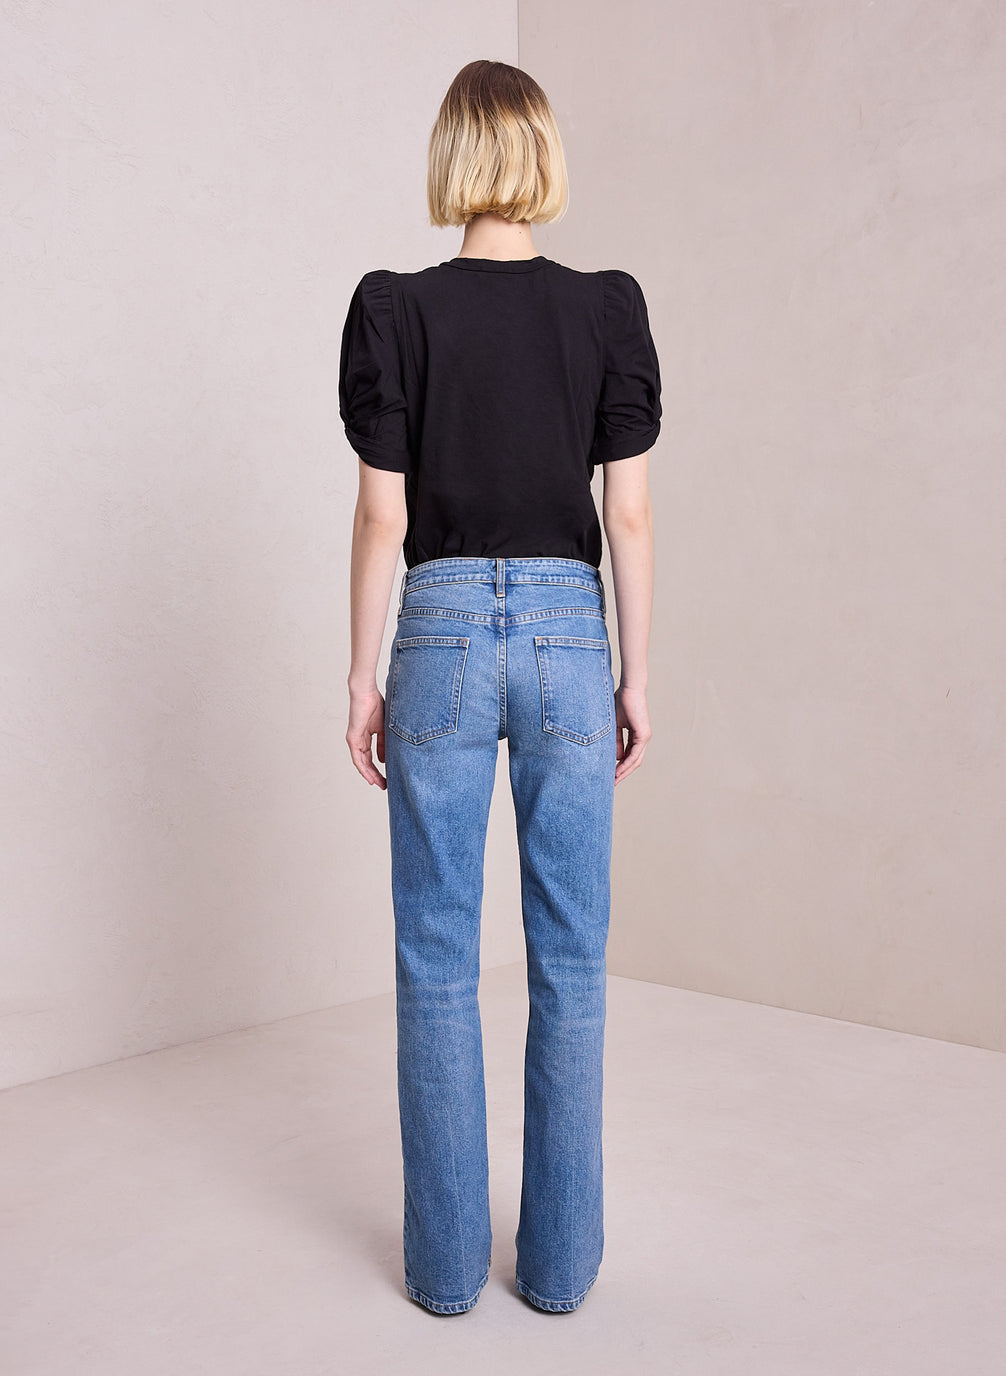 back view of woman wearing black puff sleeve tshirt and light blue wash denim jeans